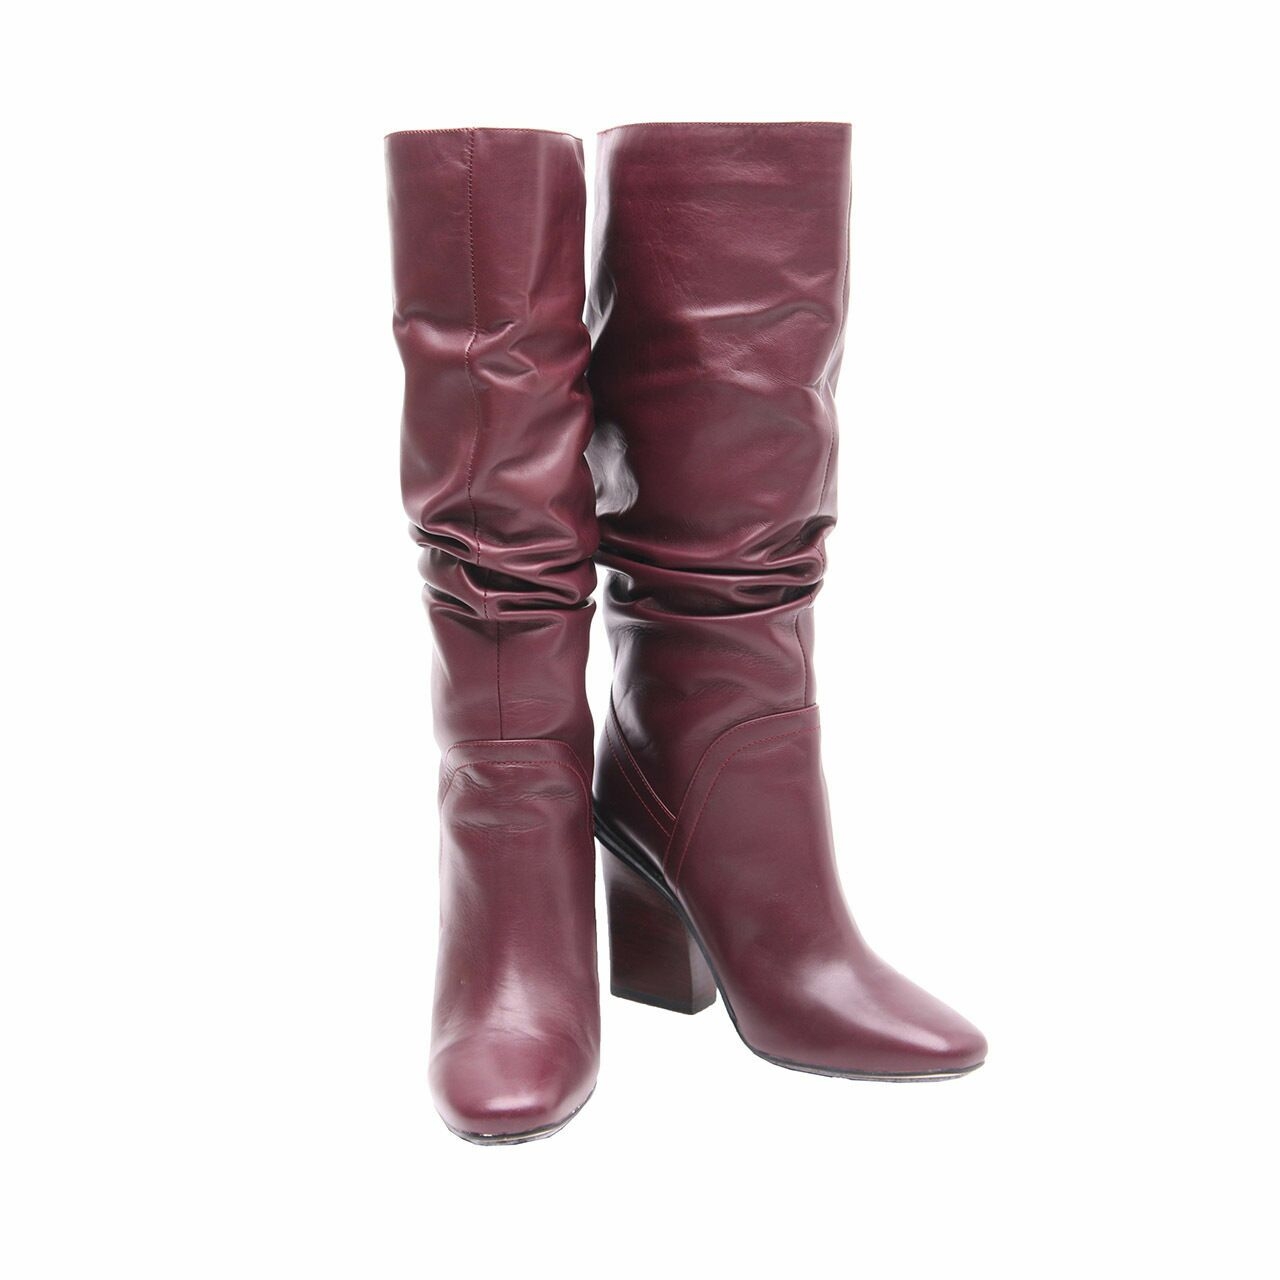 Staccato Burgundy Ankle Boots